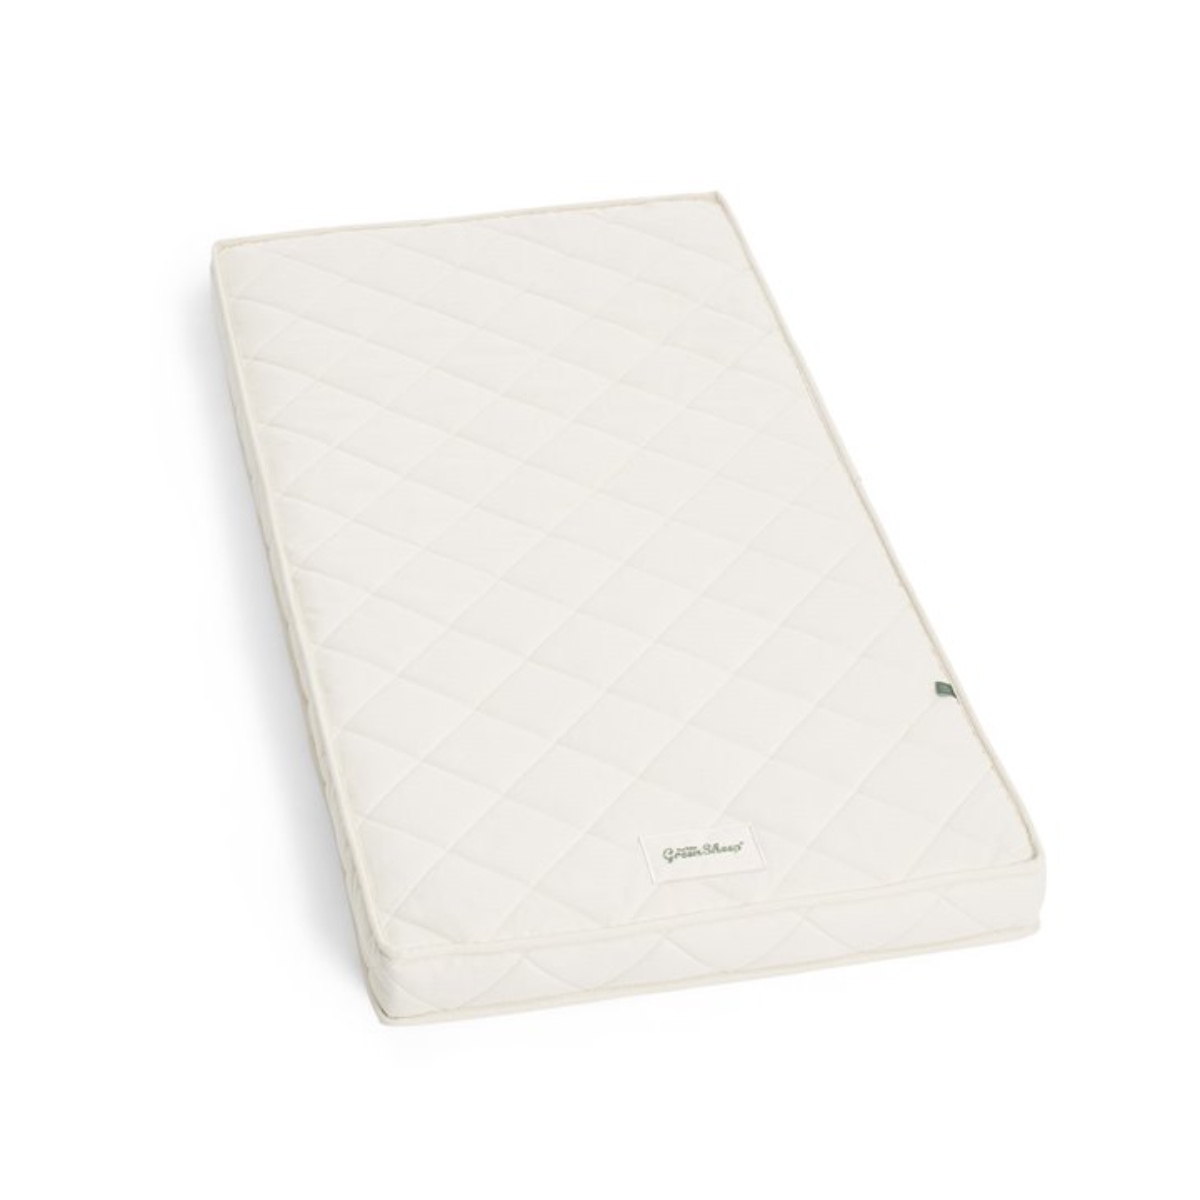 The Little Green Sheep Natural Twist Cot Mattress to fit Boori / Stokke Home Cot / Pottery Barn Kids